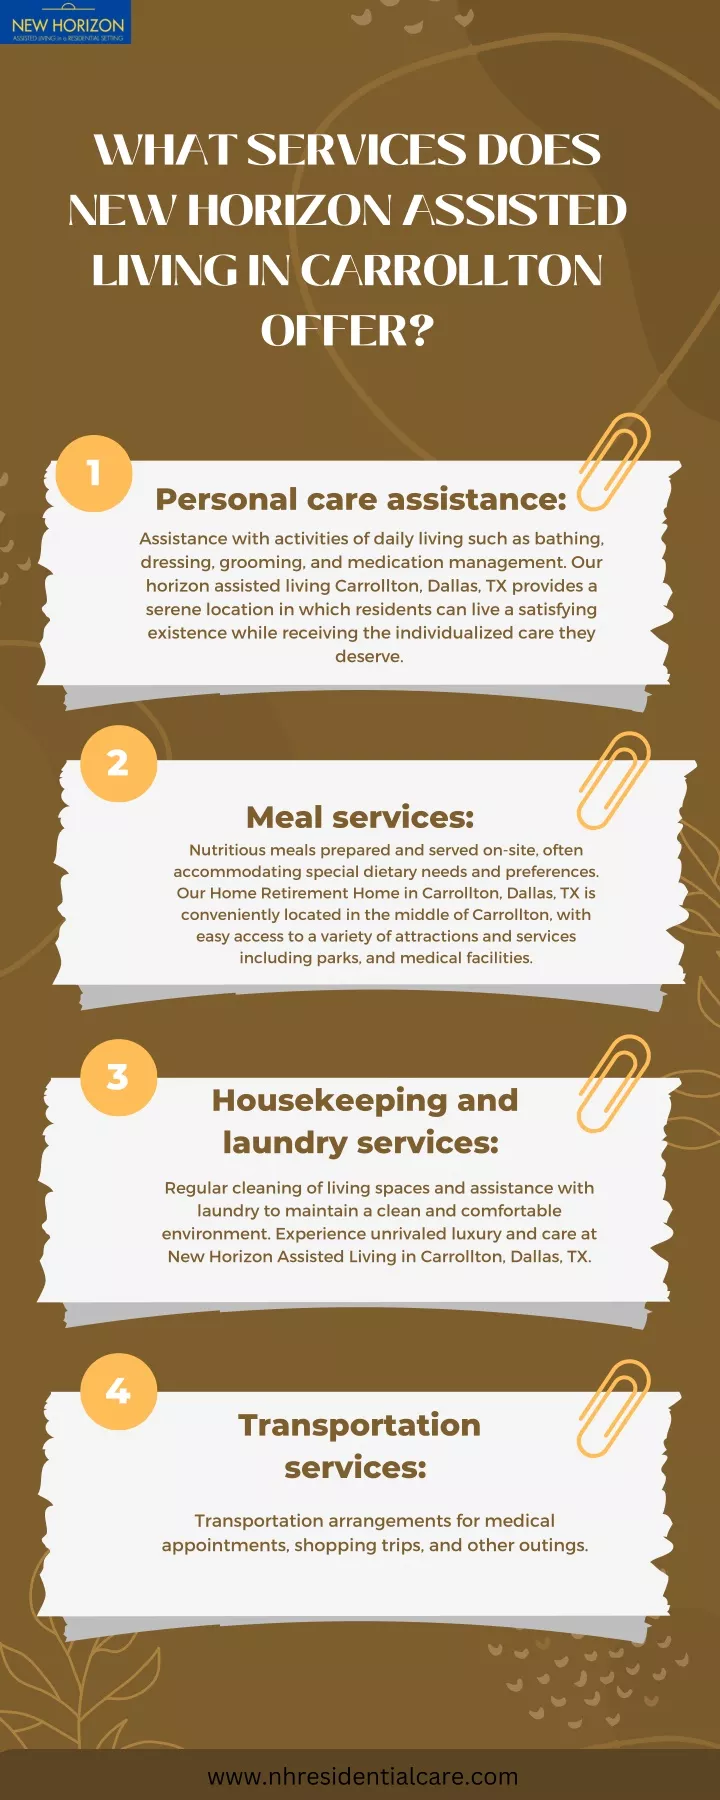 what services does new horizon assisted living